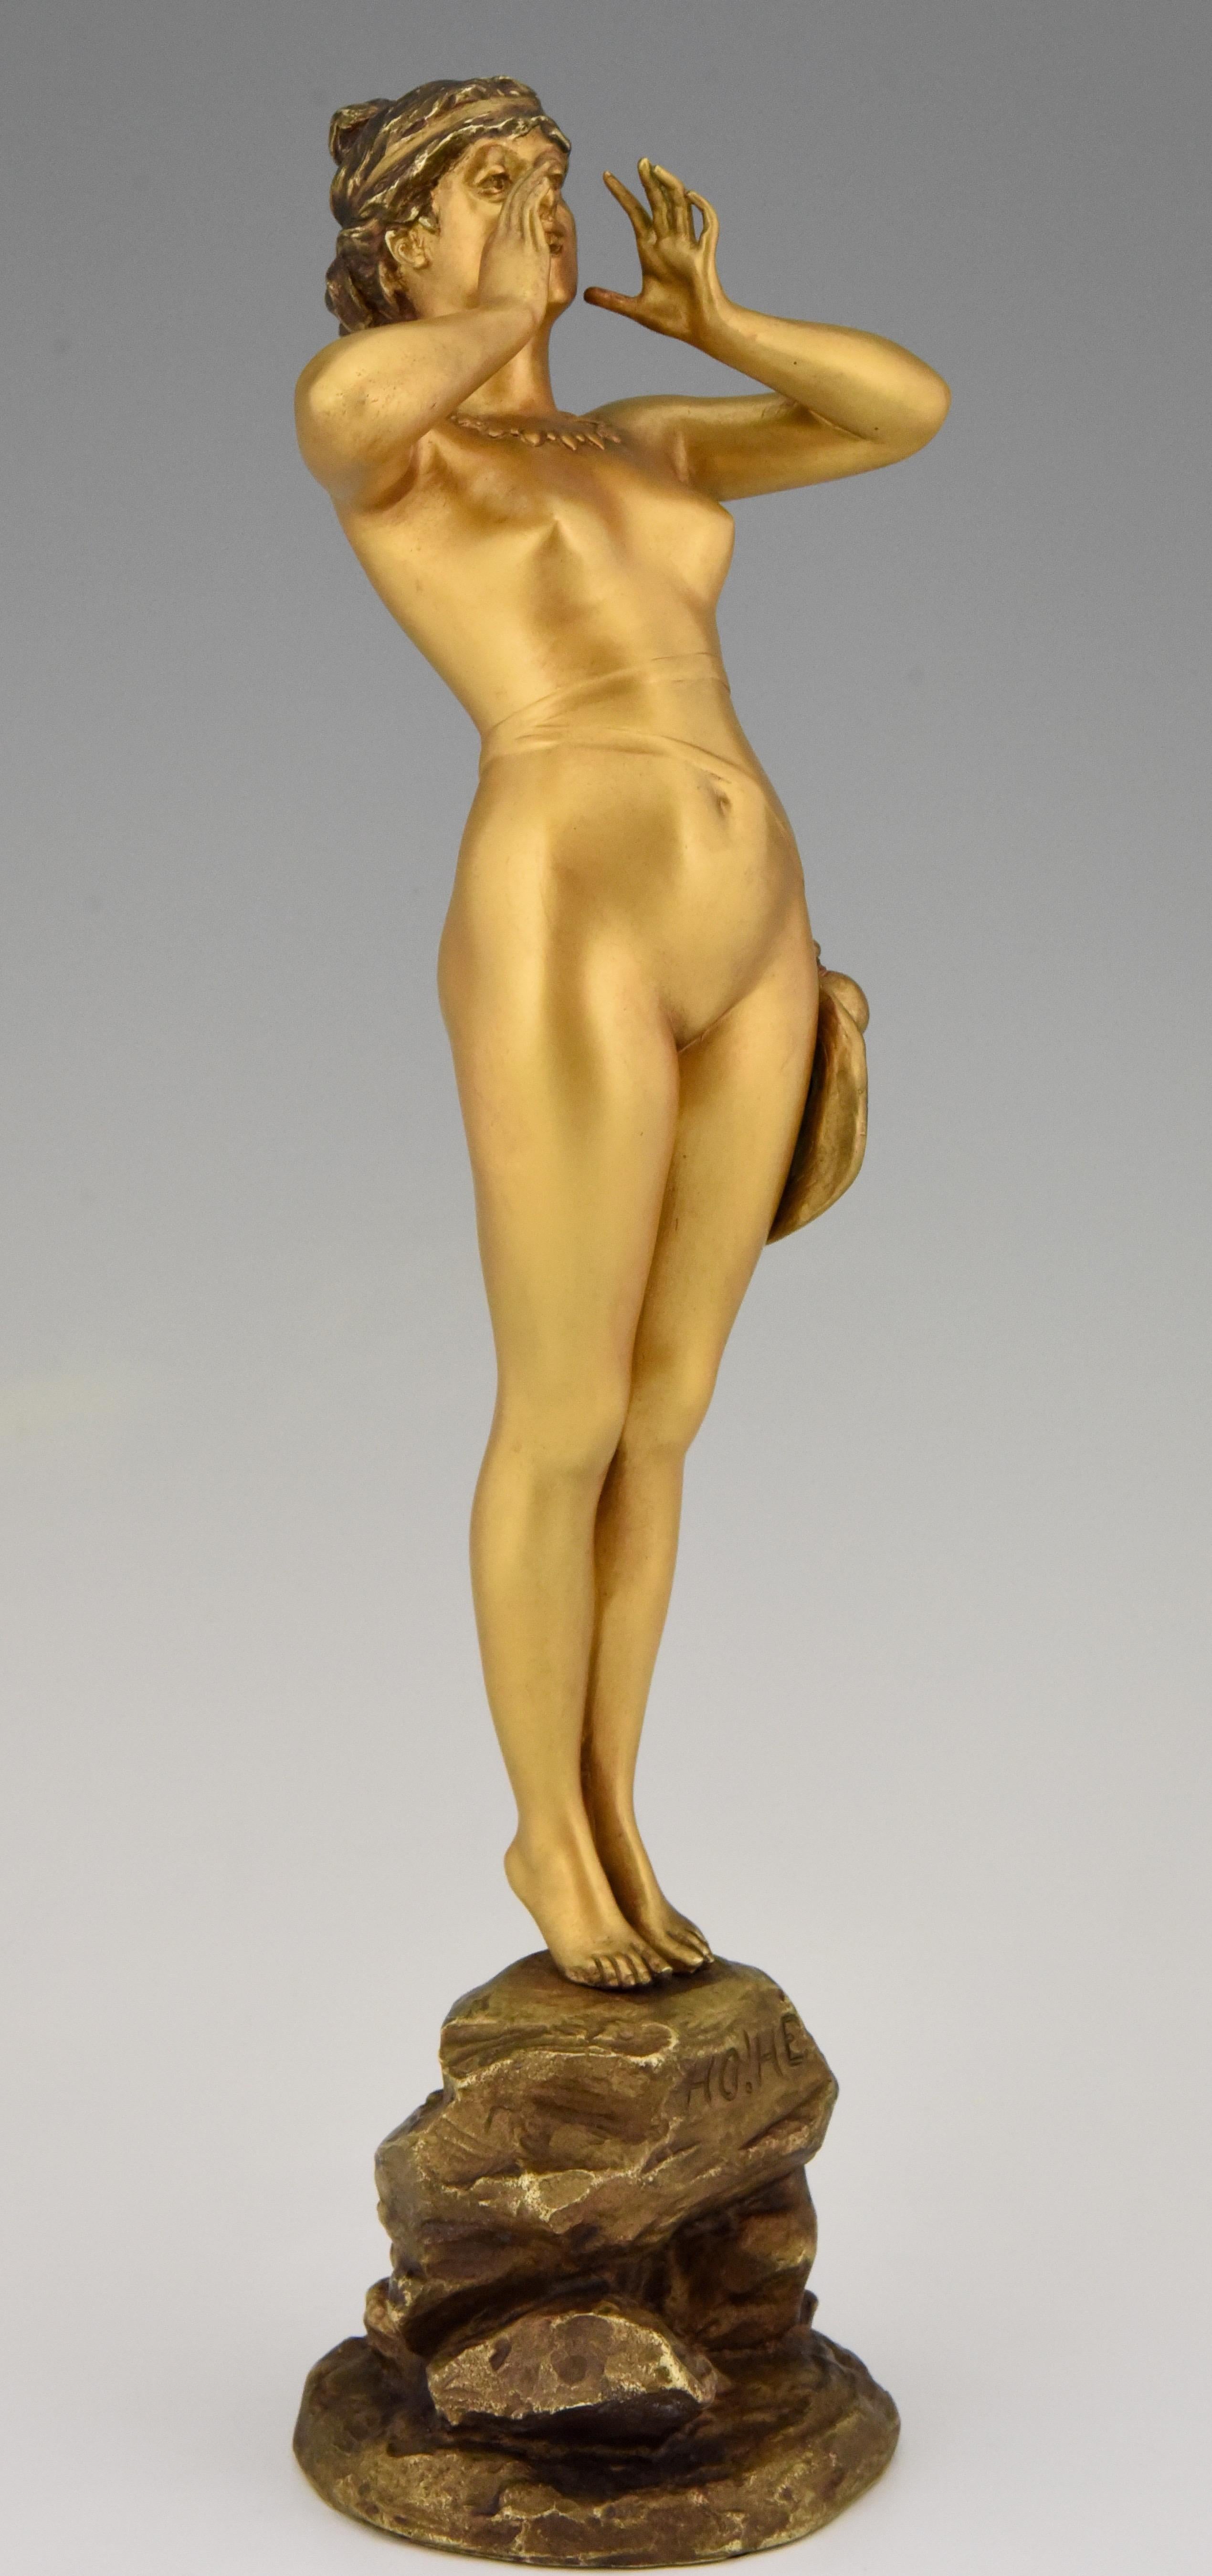 Art Nouveau Bronze Sculpture Calling Nude Lady Alfred Grevin and Friedrich Beer 1